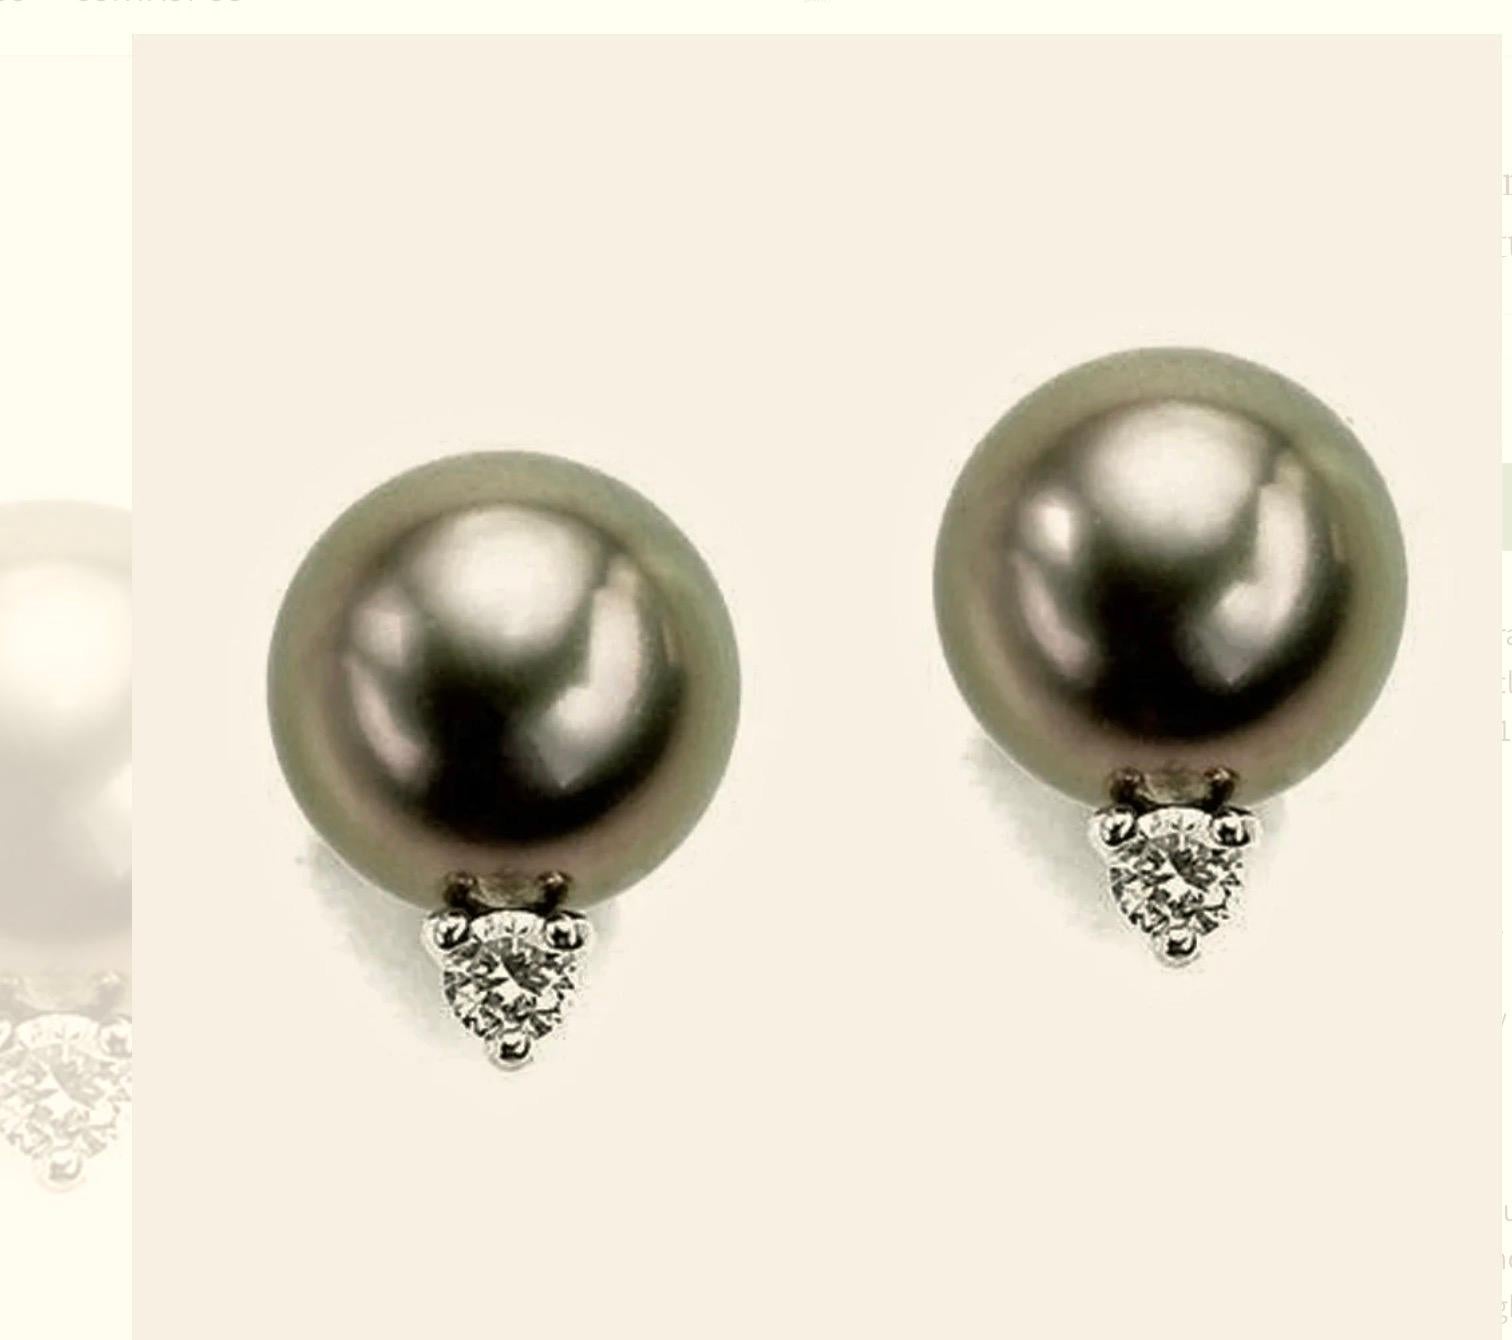 These 9.5mm natural black Tahitian pearl diamond stud earrings are perfectly round and are set in your choice of 14K yellow gold or 14K white gold. 

pearl size: 9.5mm
pearl shape: round
type; Tahitian pearl
color: black
overtone: dark grey luster